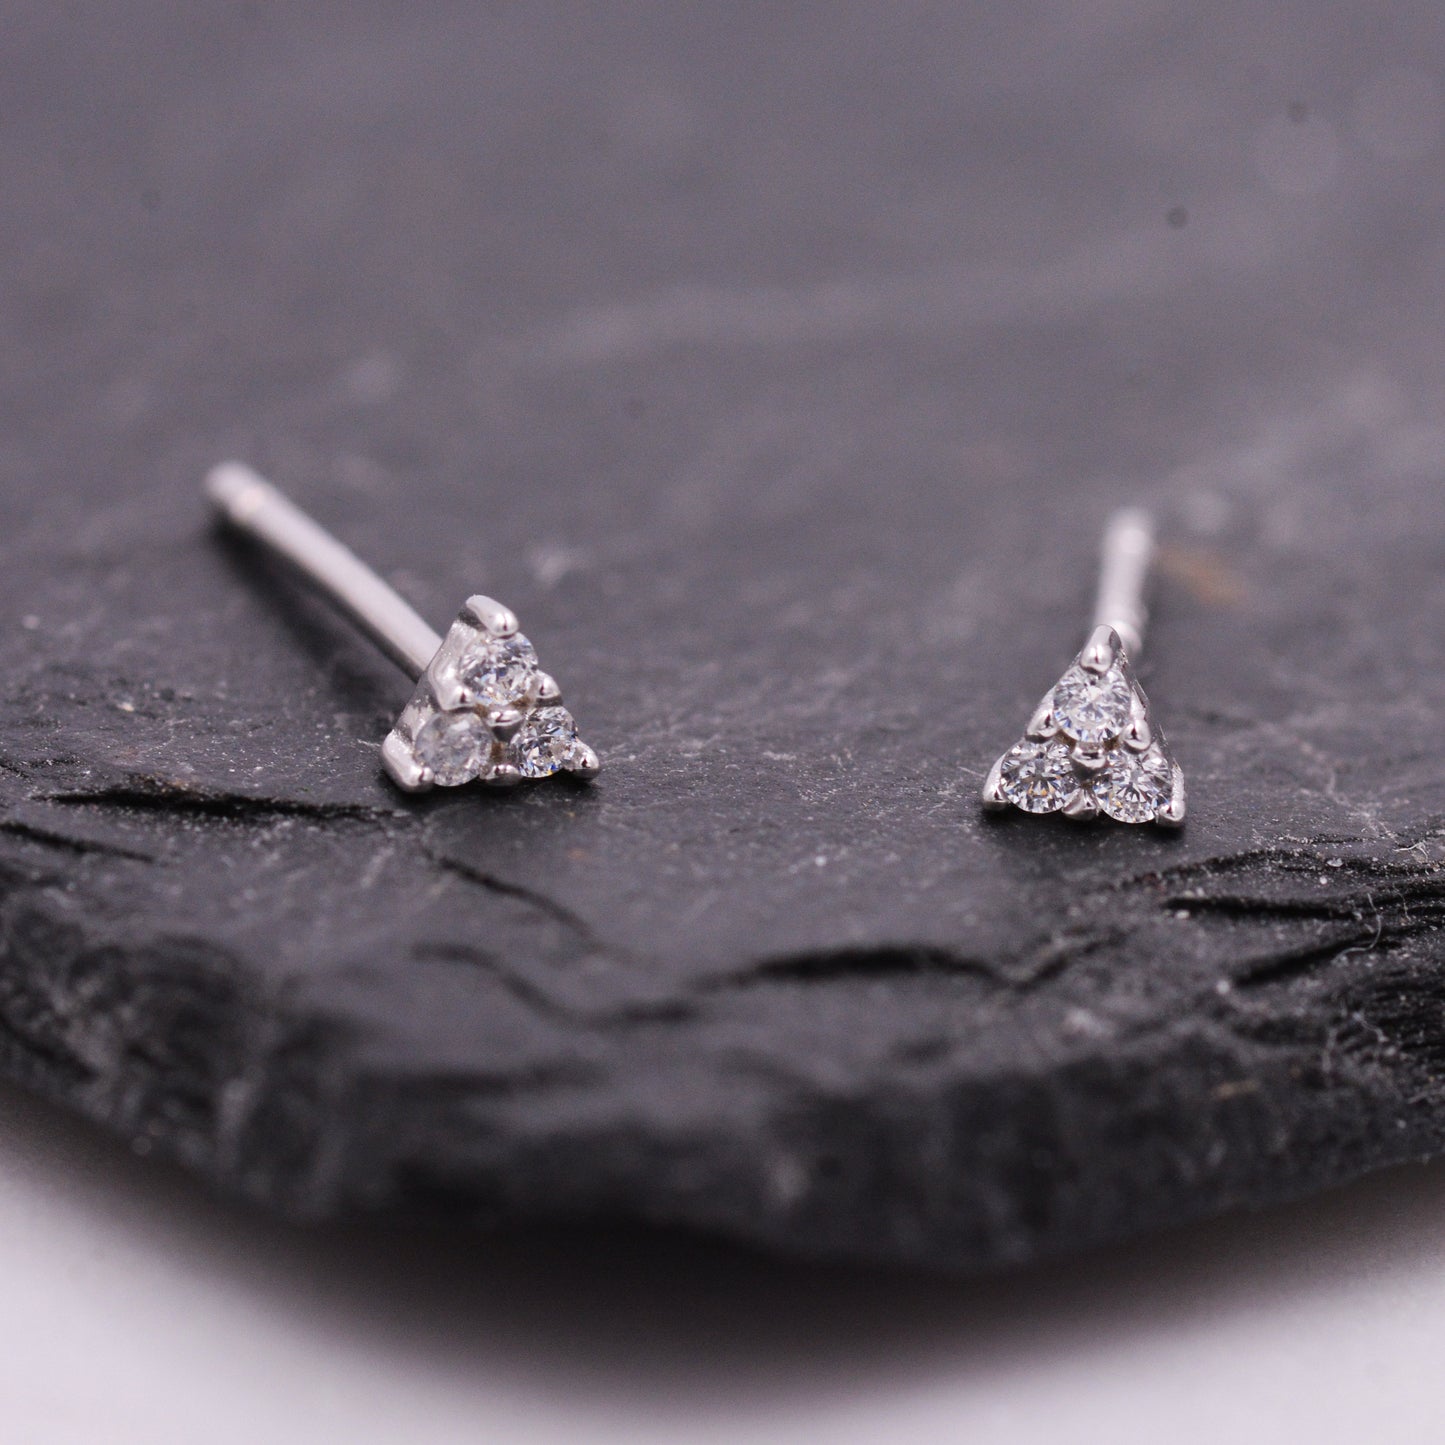 Three CZ Crystal Tiny Stud Earrings in Sterling Silver, Trinity Stud, Three Ball Stacking Earrings, Ear Stacks, Extra Tiny, Triple CZ